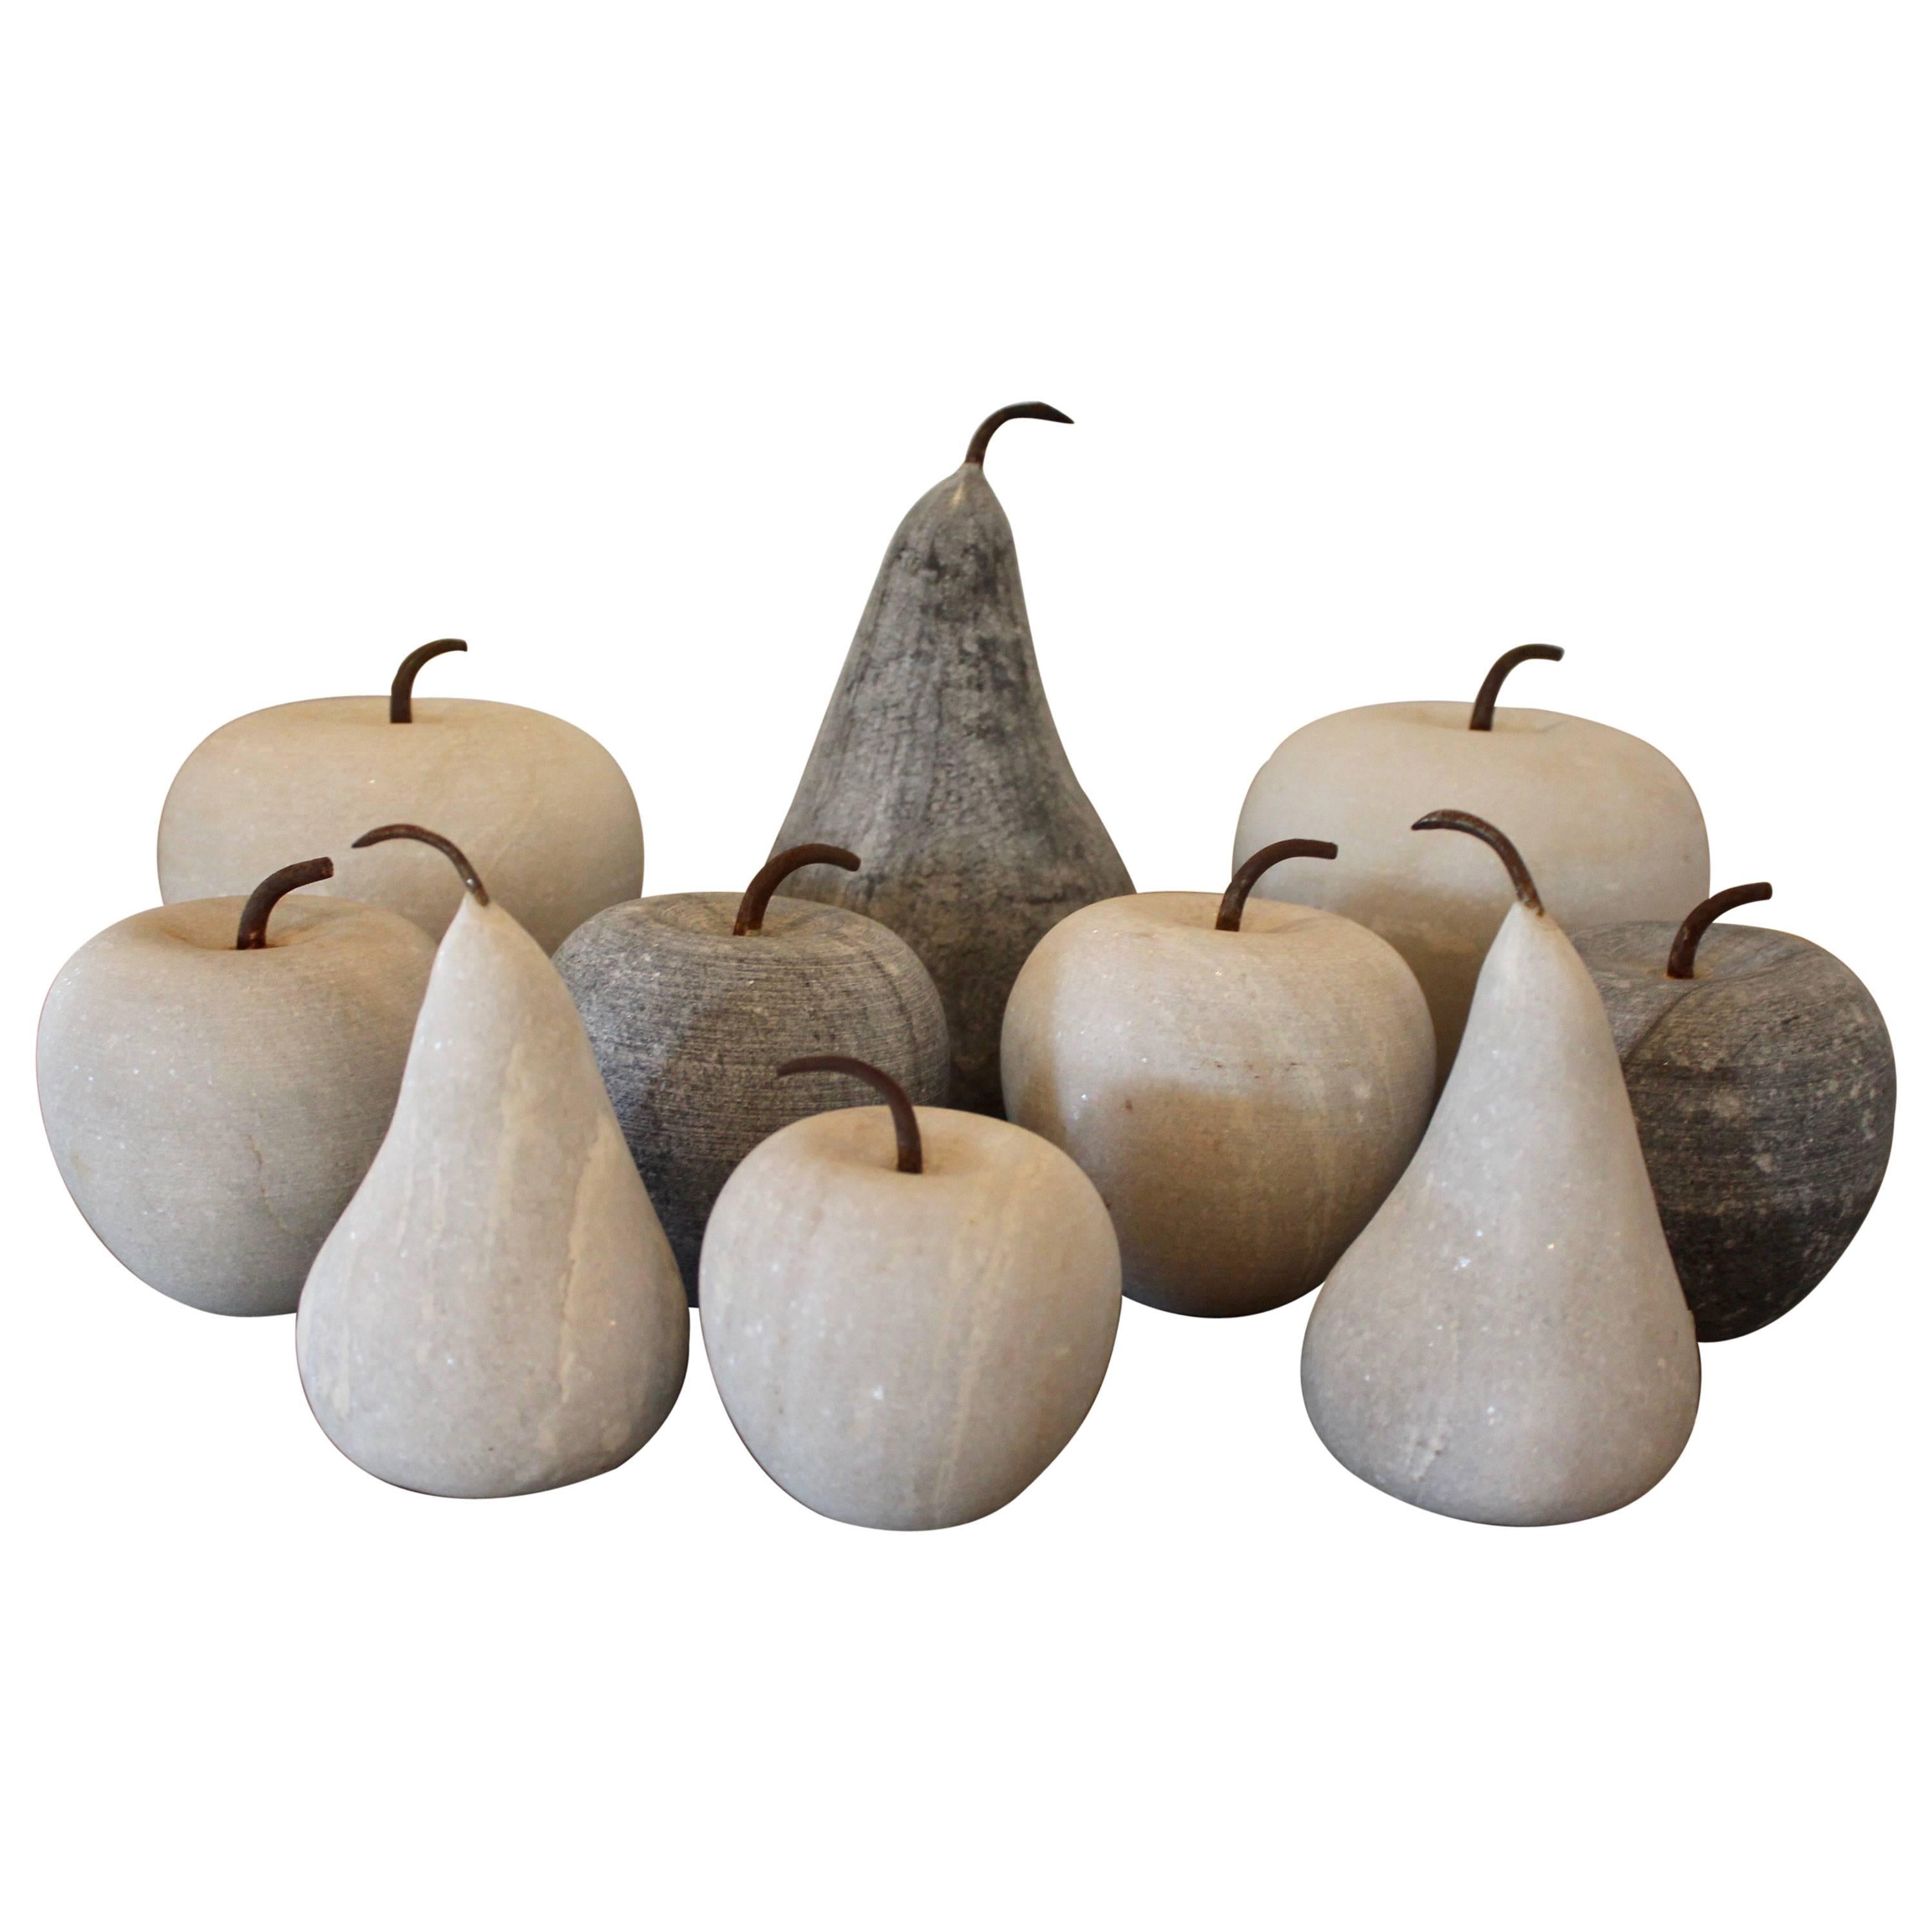 Assortment of Marble Apple and Pear Accessories